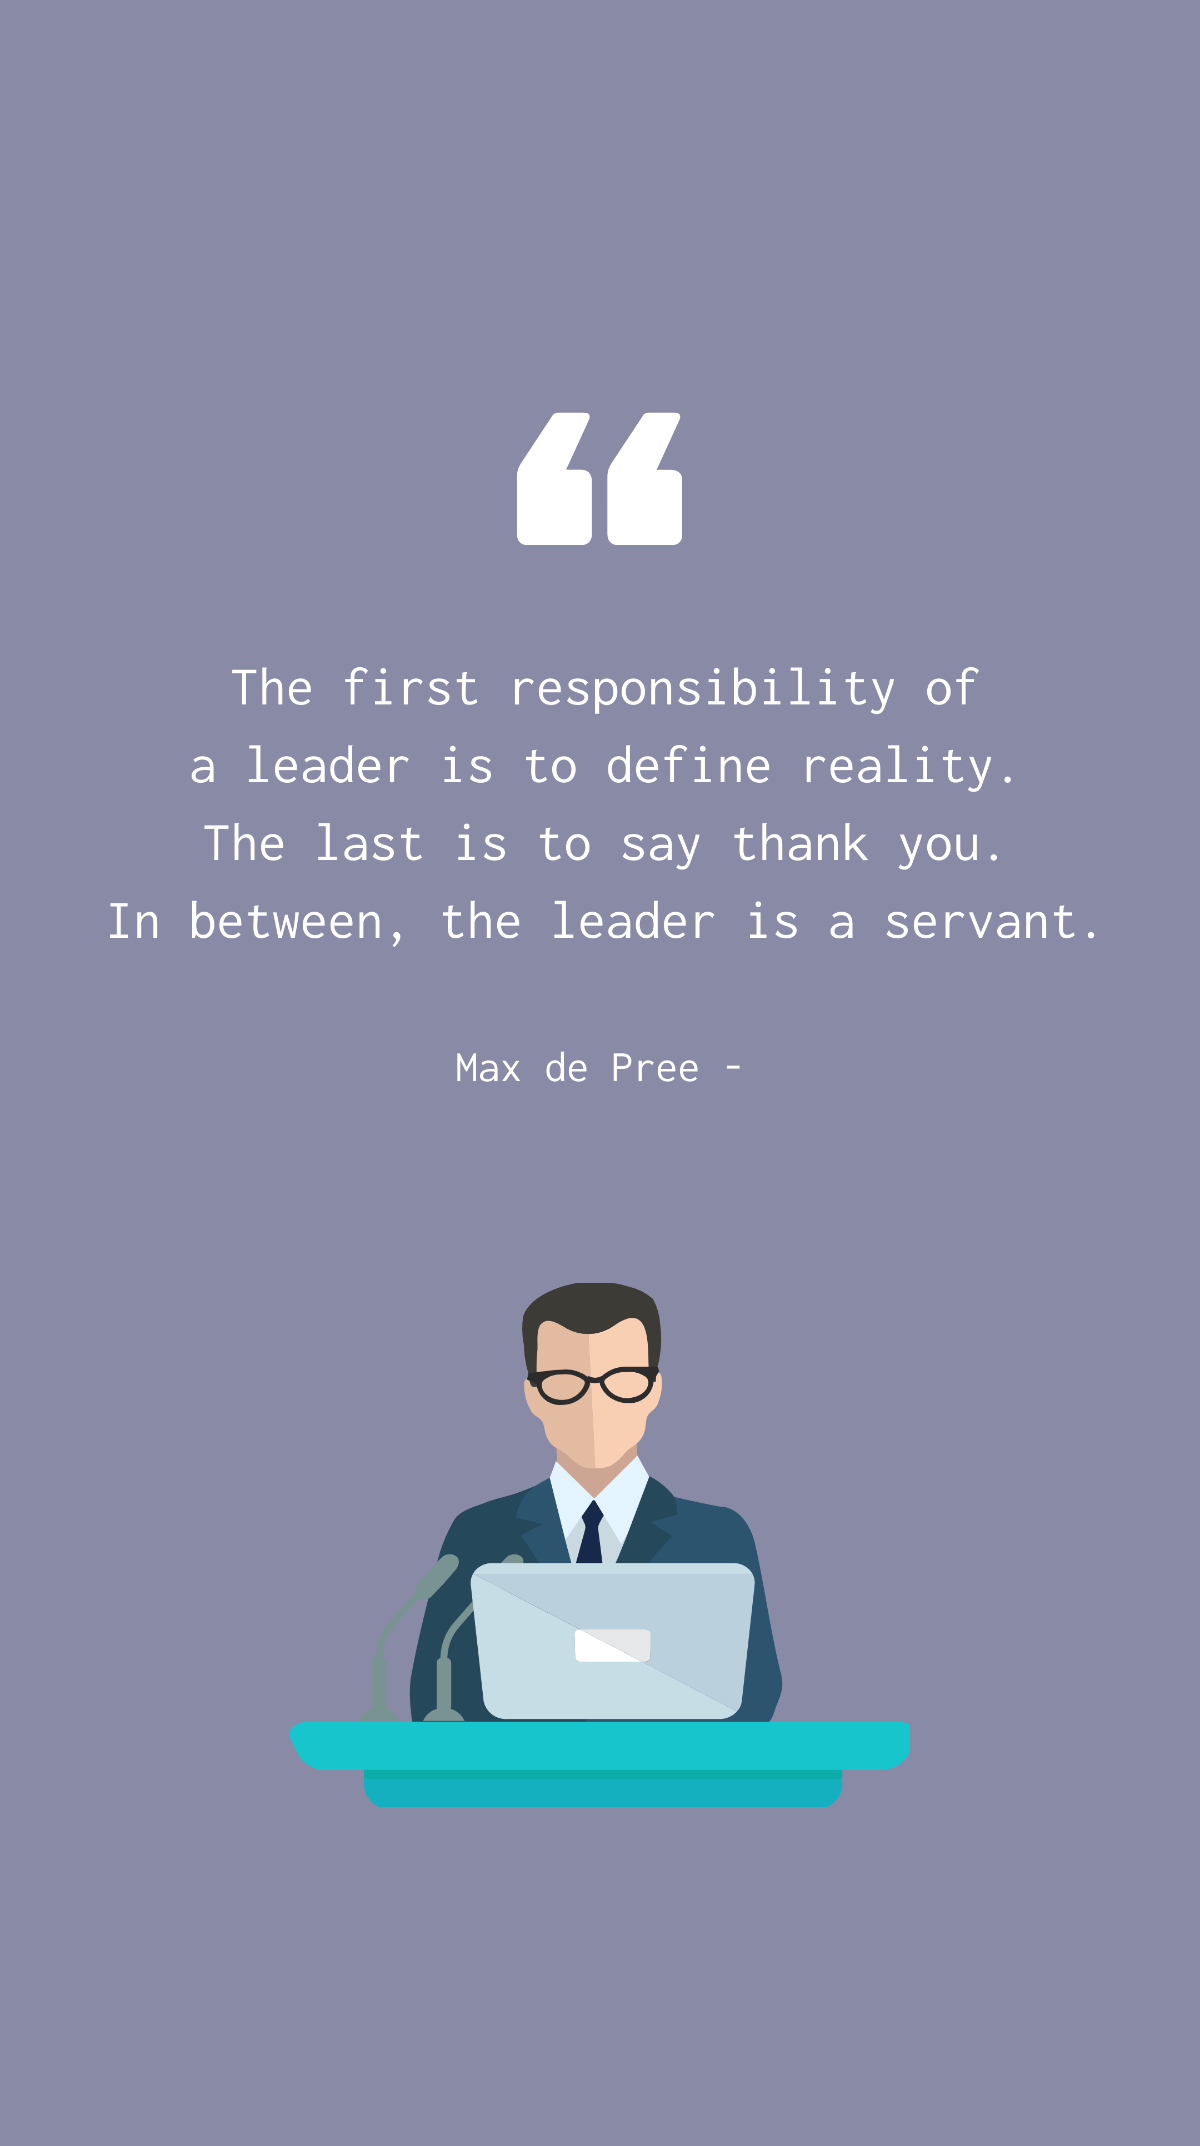 Max de Pree - The first responsibility of a leader is to define reality. The last is to say thank you. In between, the leader is a servant.